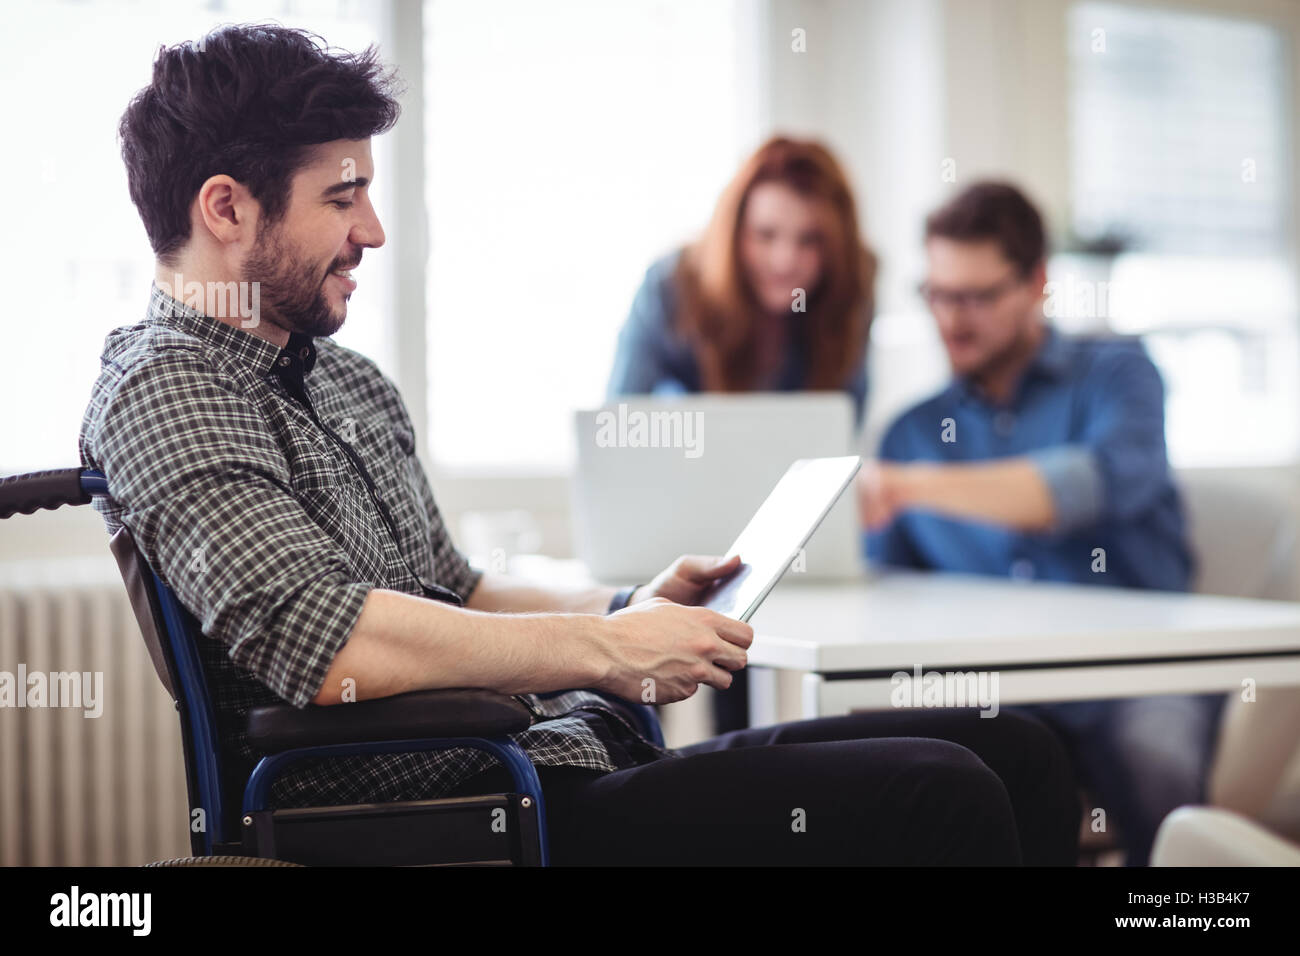 Businessman on wheelchair using digital tablet Banque D'Images